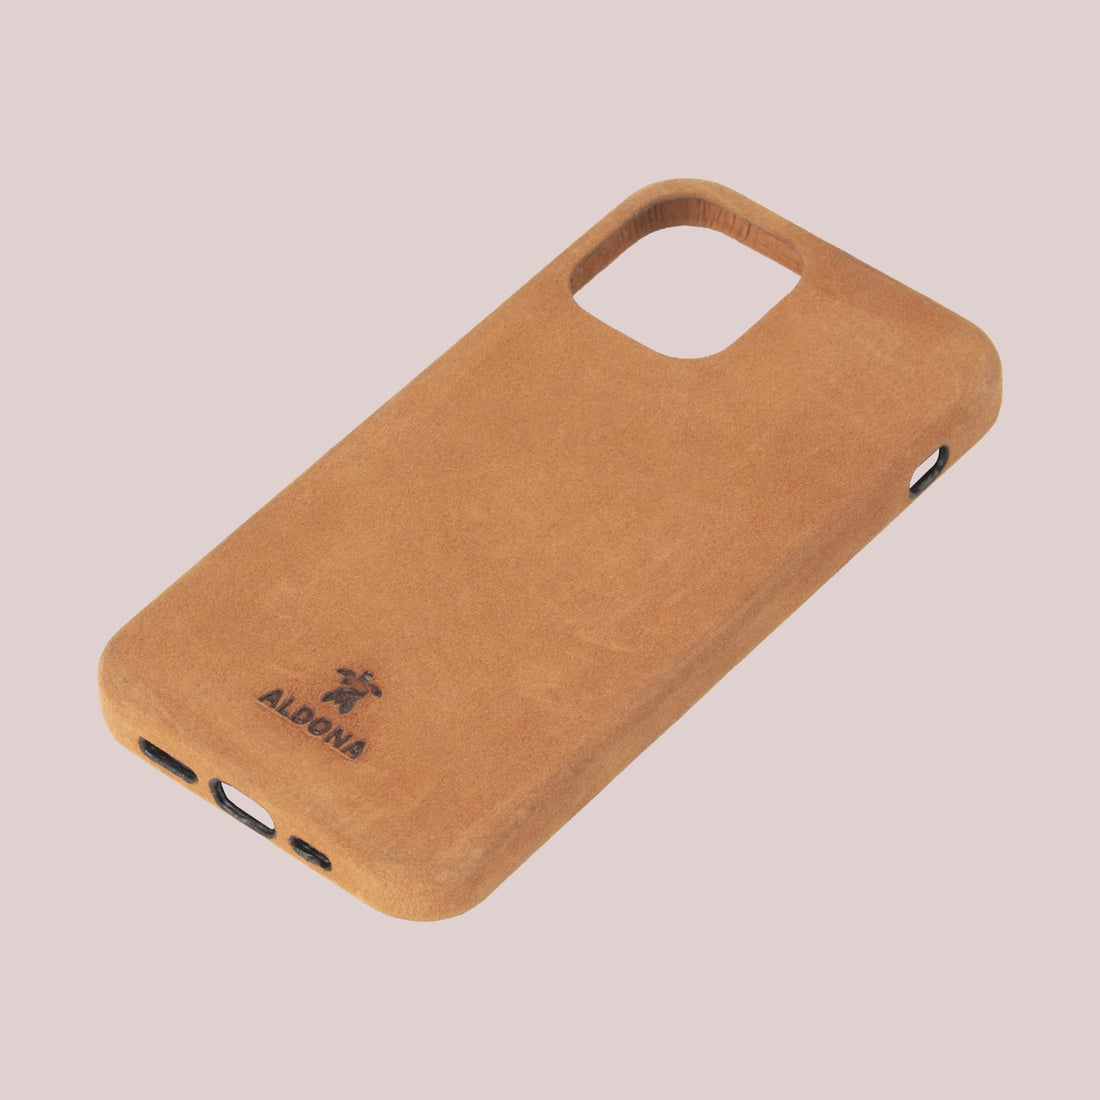 Kalon Case for iPhone 13 Mini with MagSafe Compatibility - Burnt Tobacco